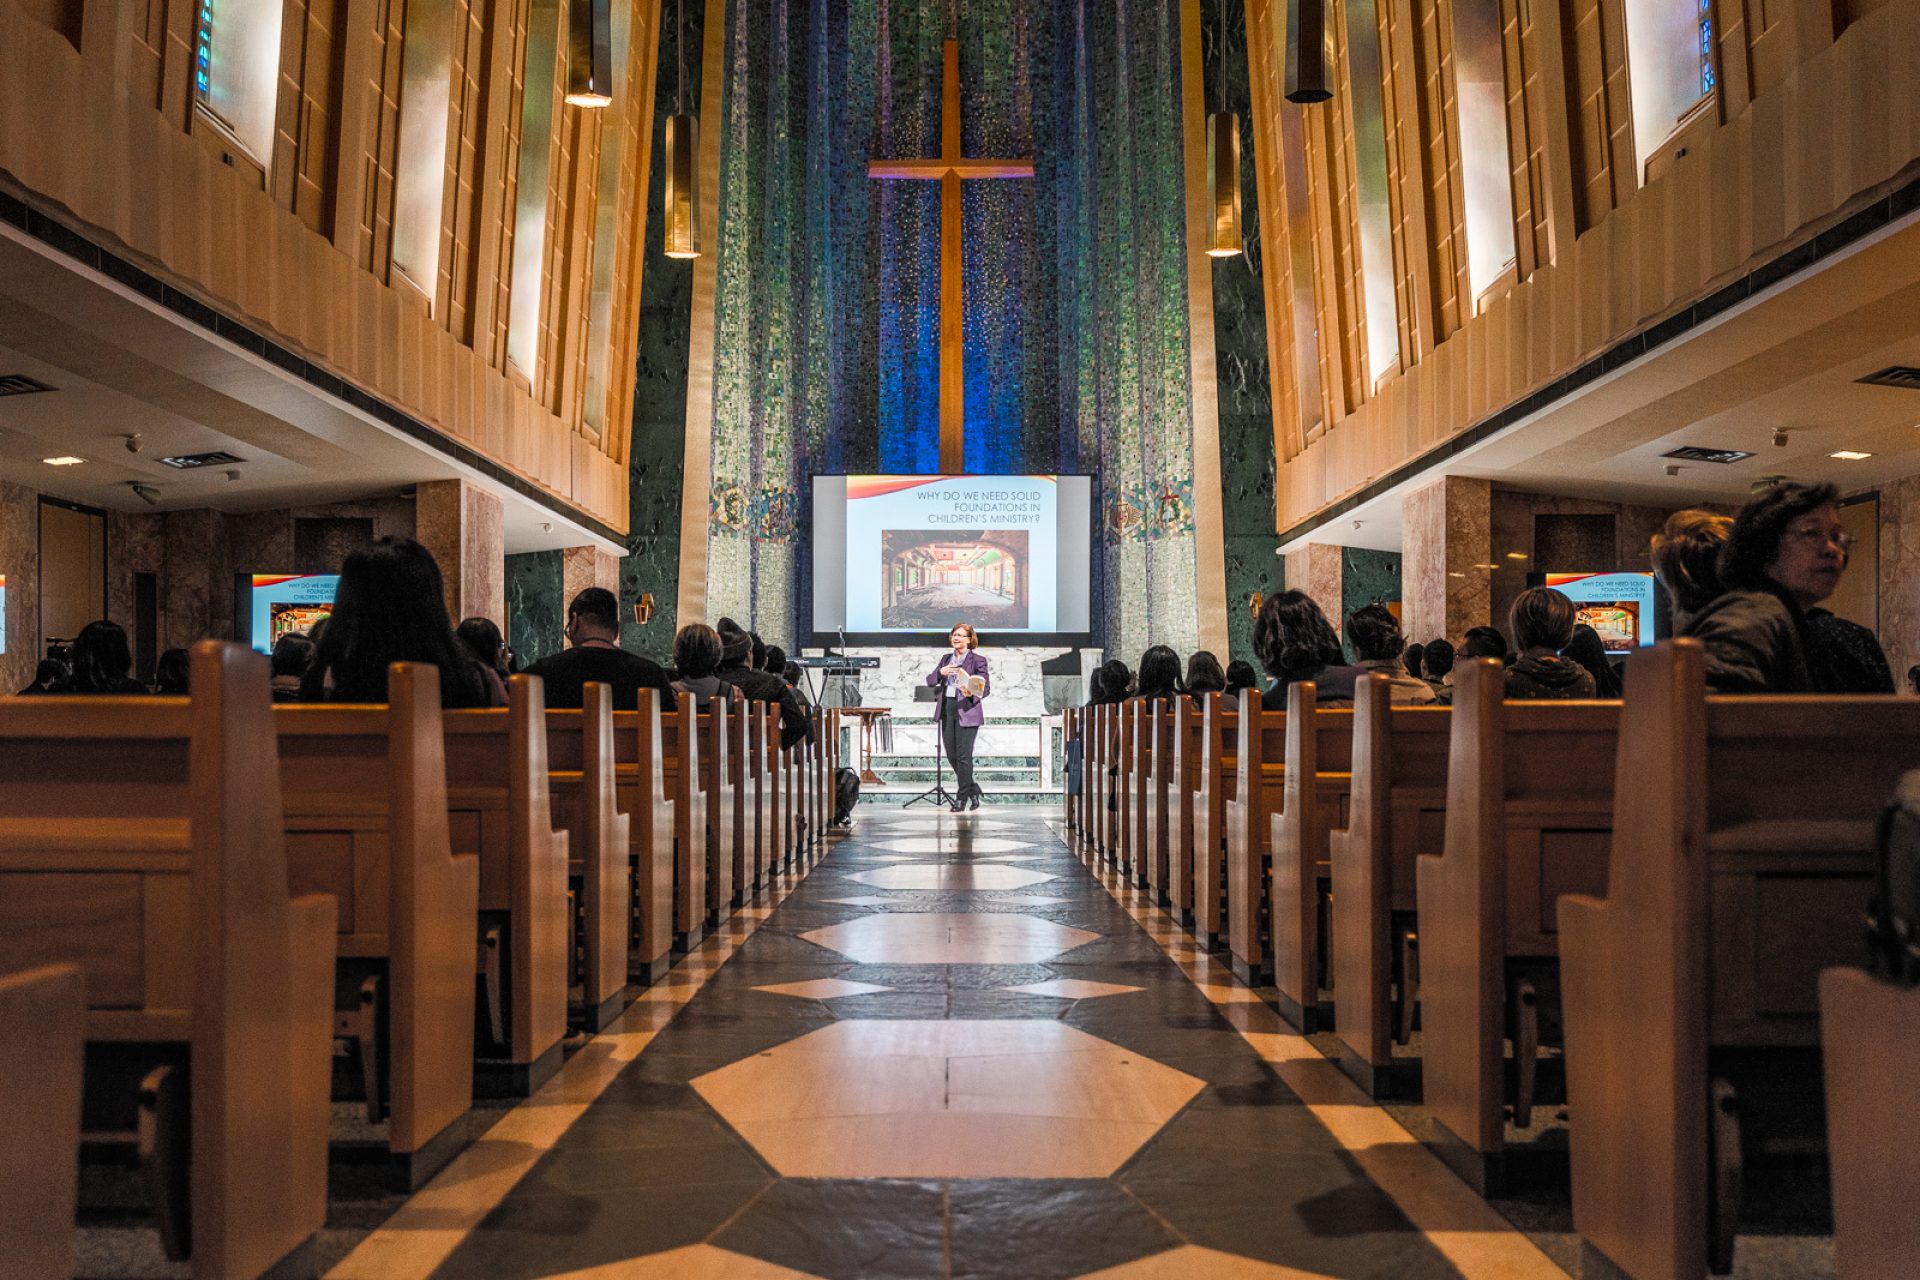 A woman with the spotlight on her teaches in a dimly lit chapel